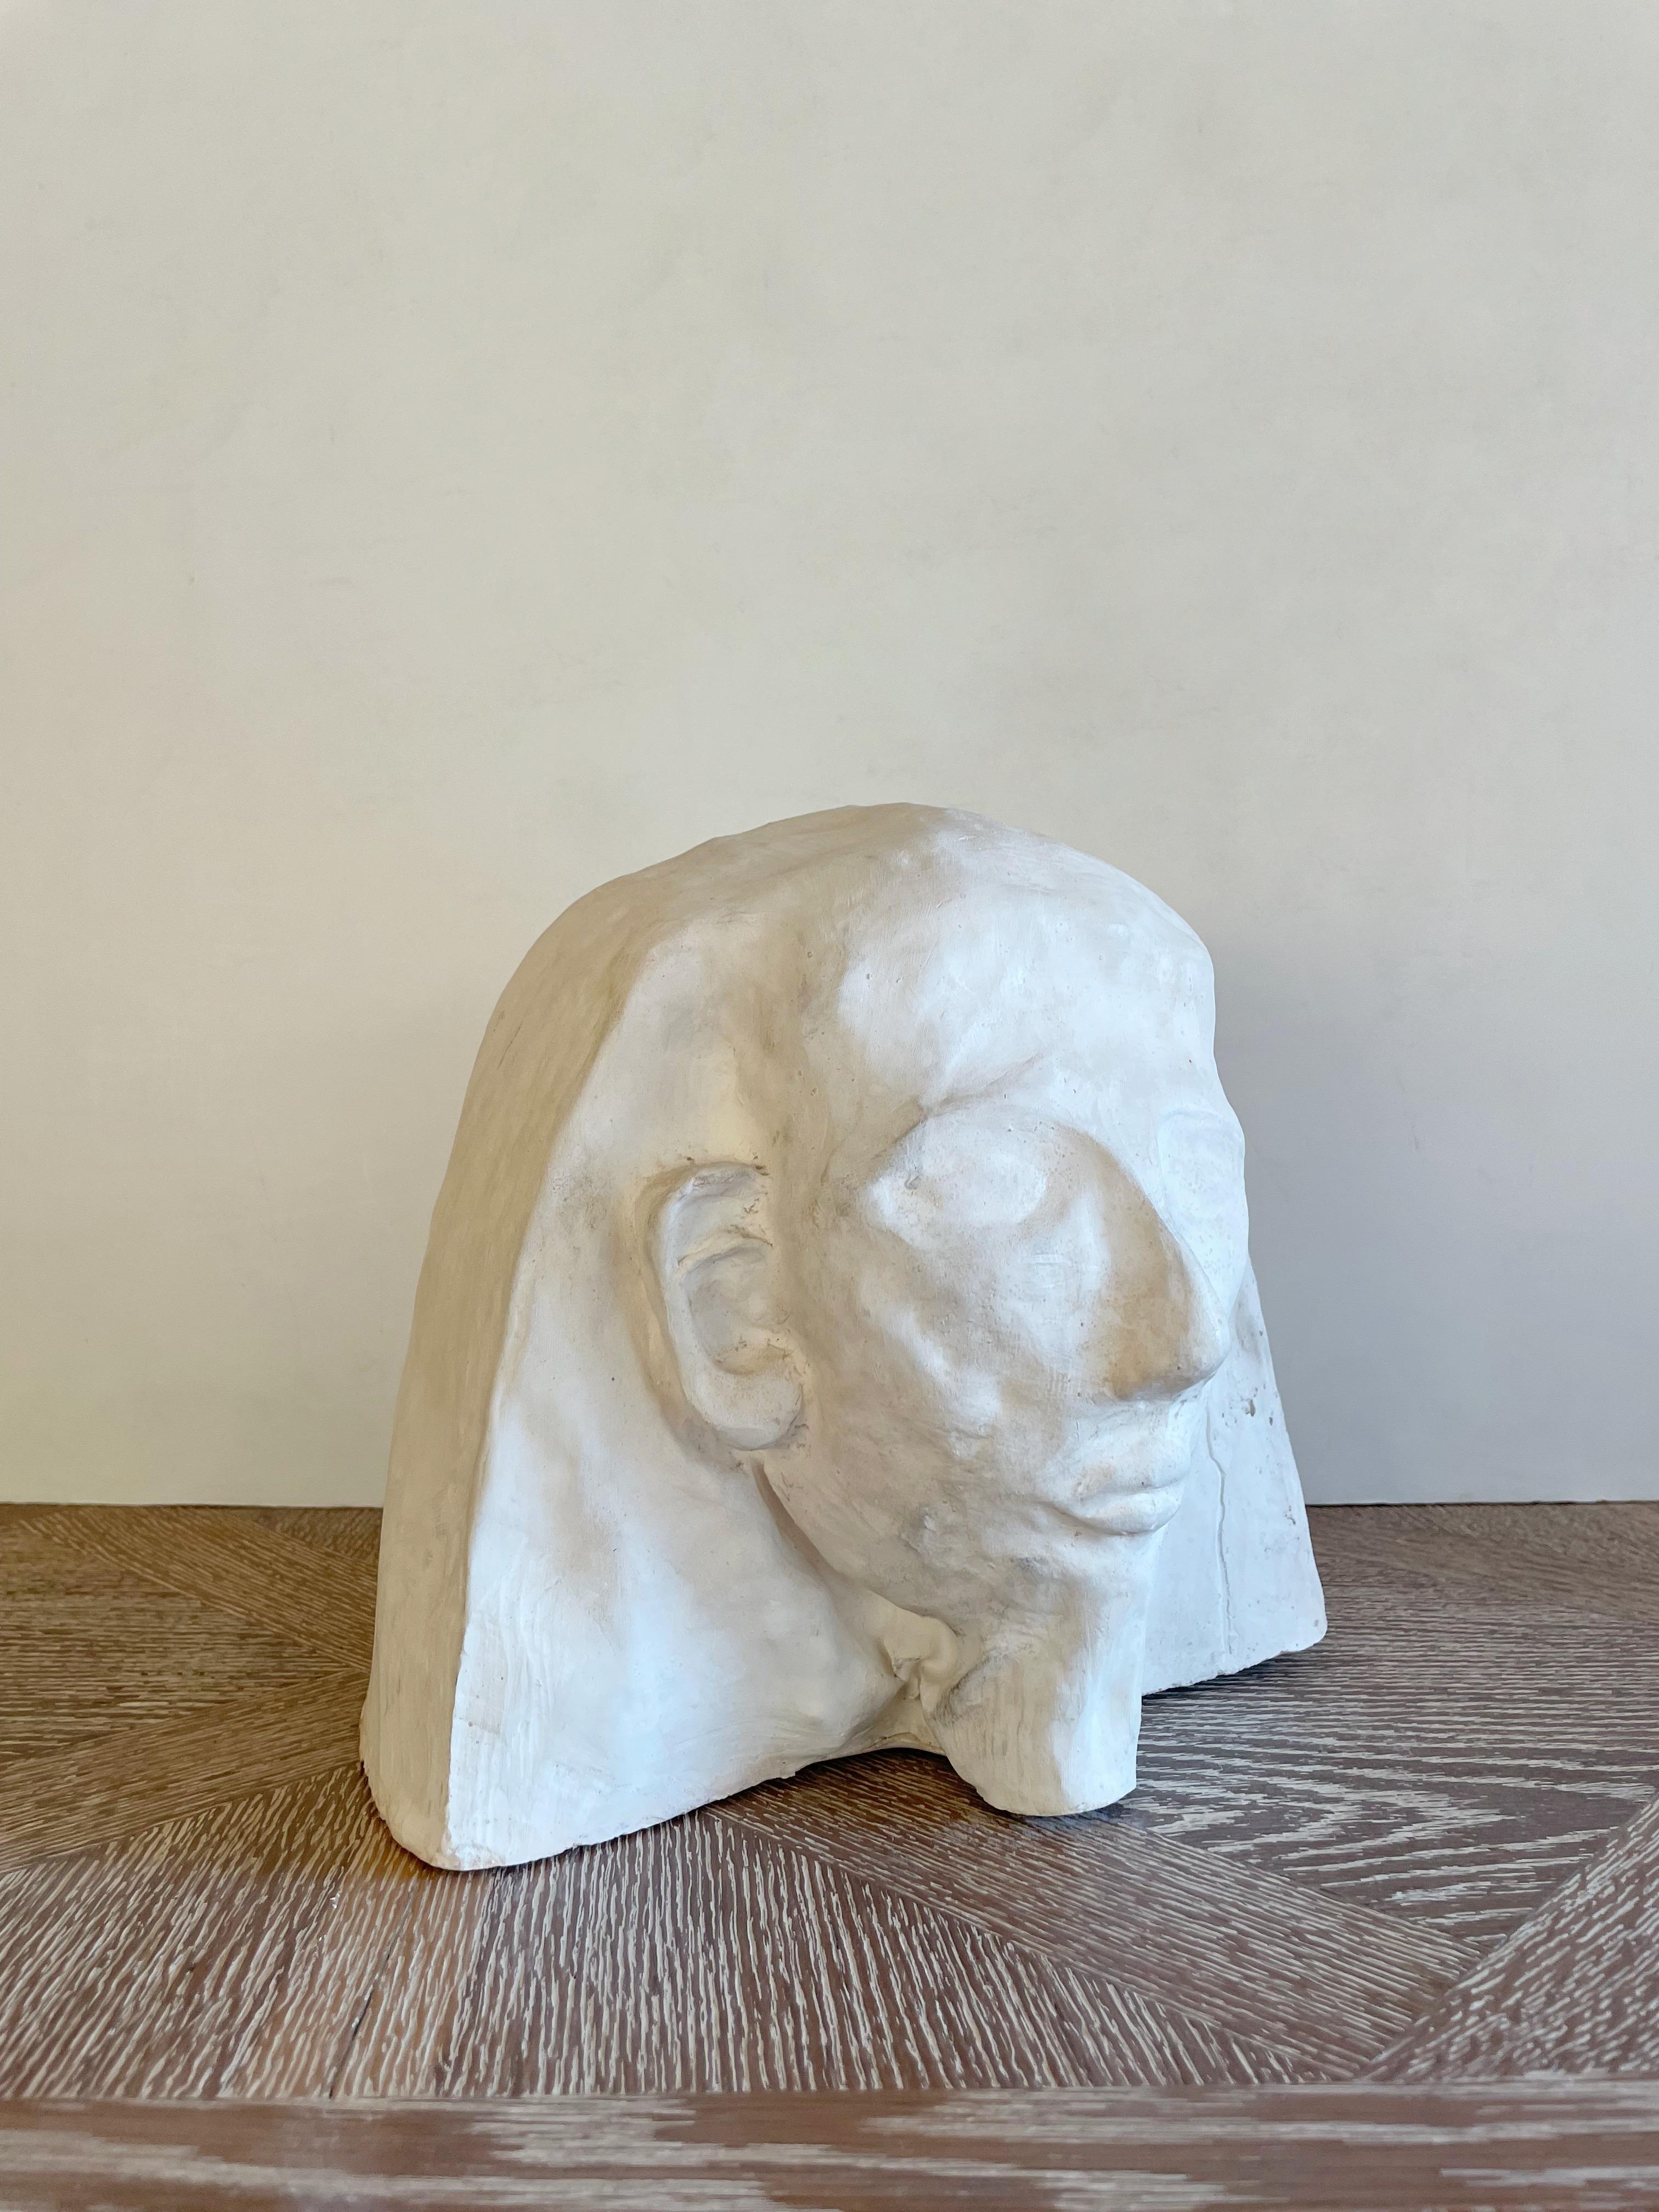 Unsigned, this heavy white head plaster sculpture conveys a majestic impression thanks to the skillful combination of curved and sharp lines.
The back of the head features a deep slash which may be the artist signature.